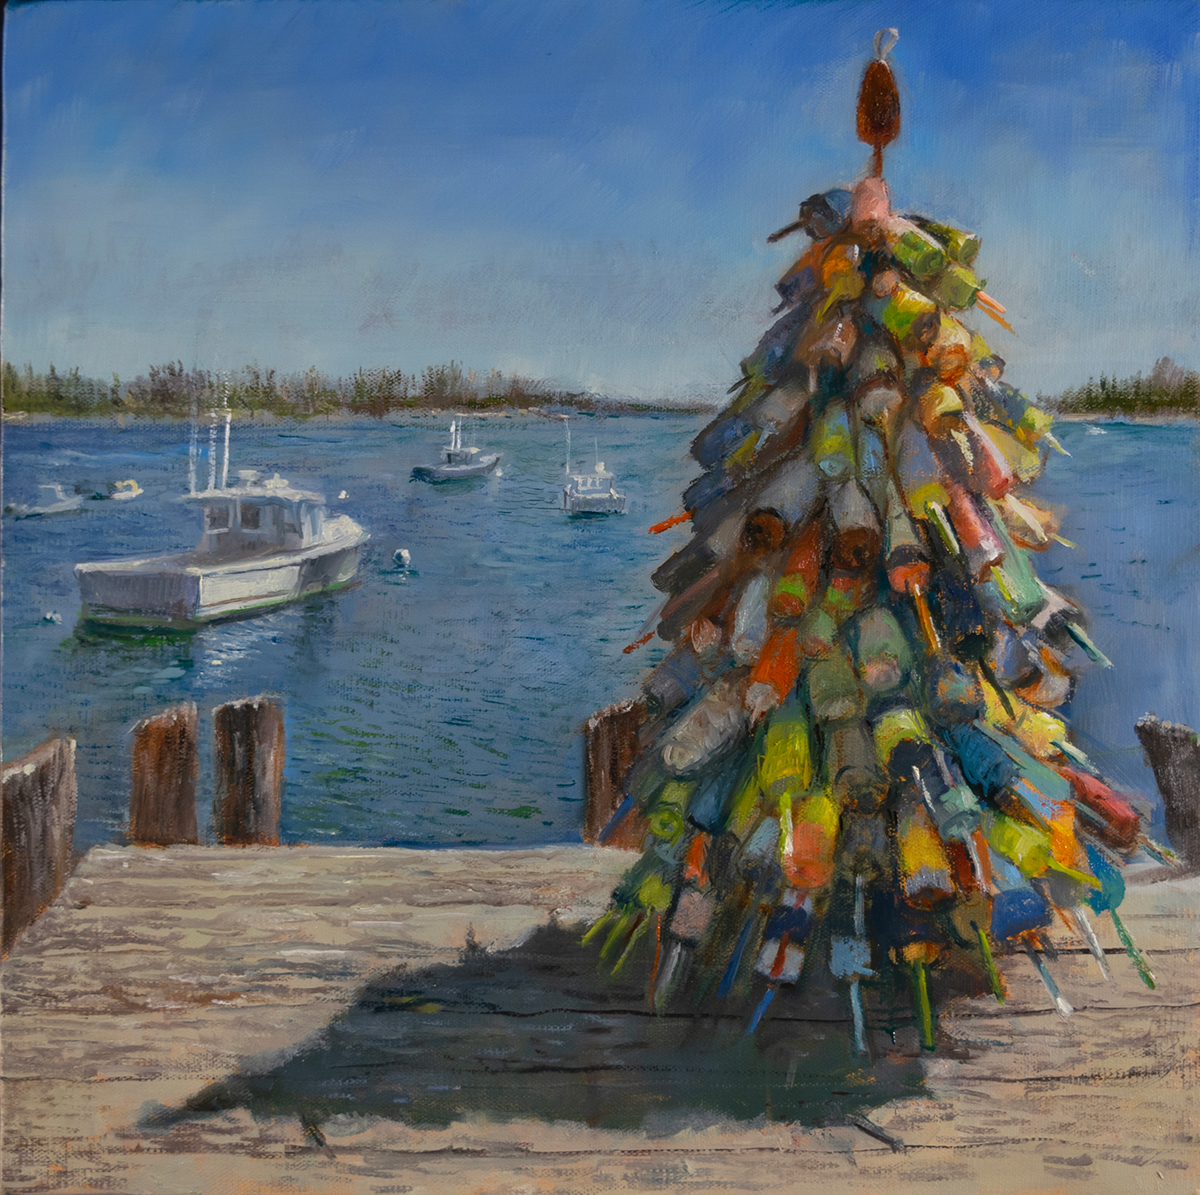 Harbor Tree is an oil painting of the community dock at Friendship ME by artist Elizabeth Reed